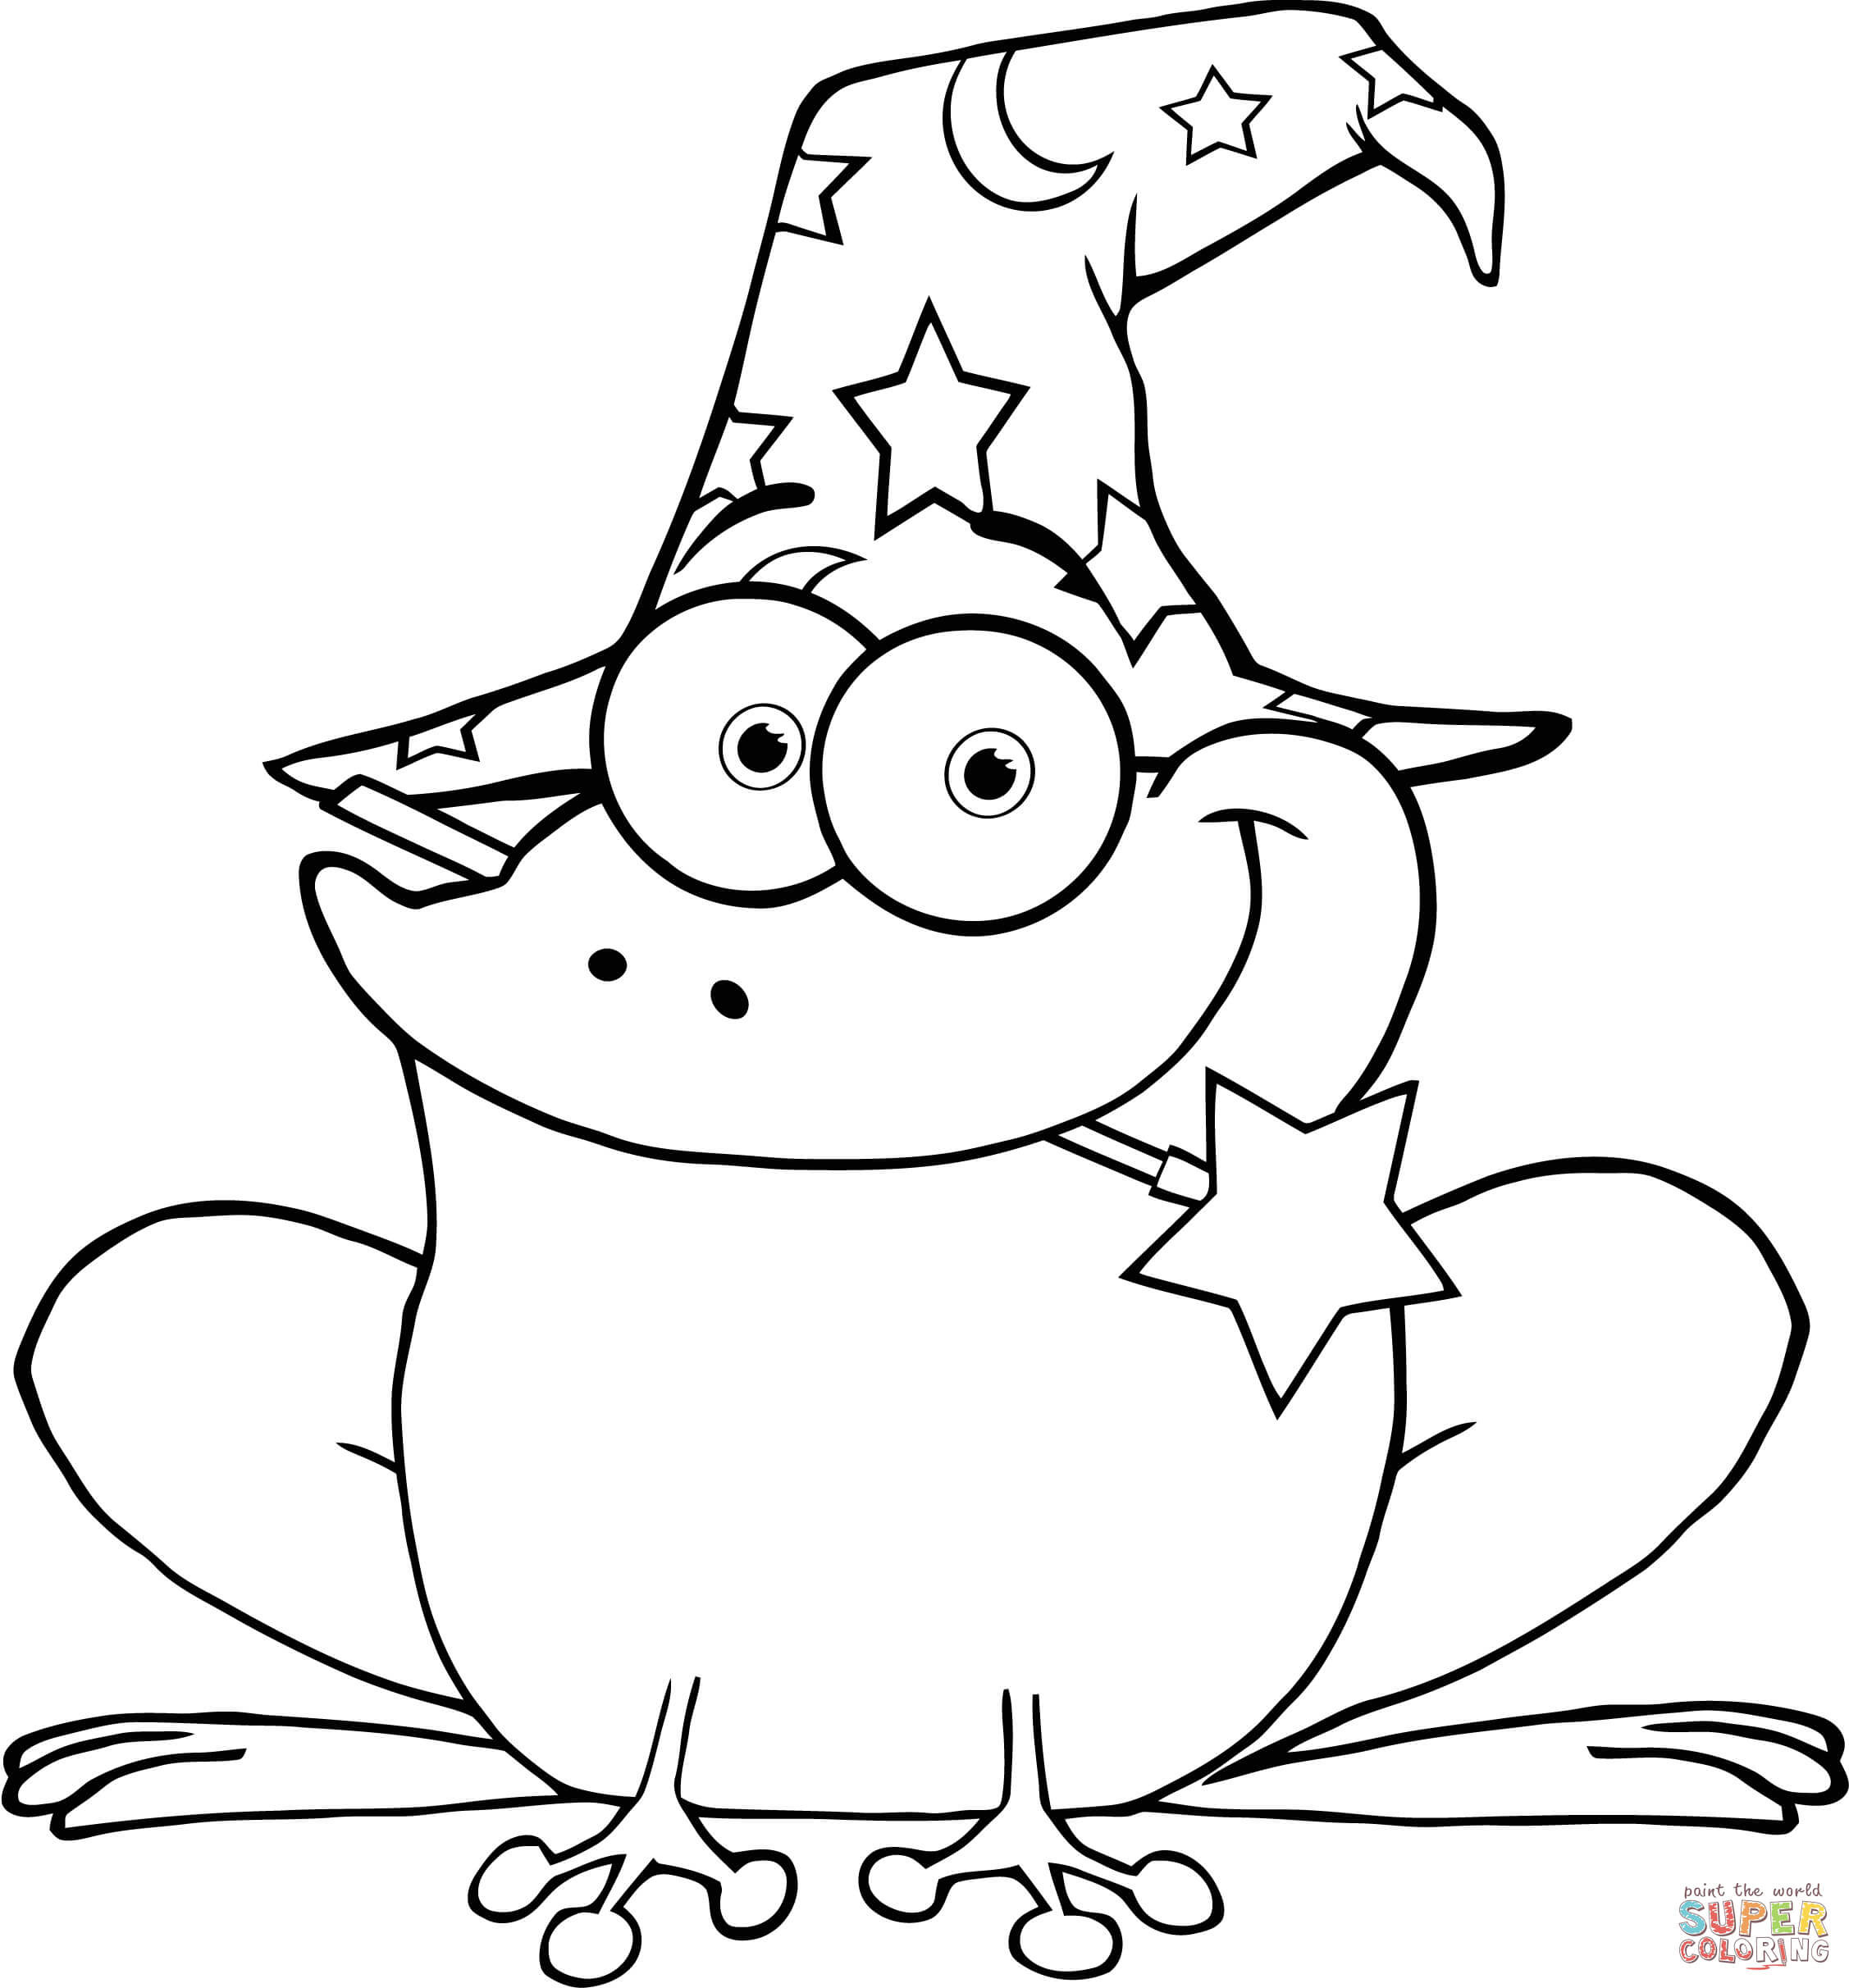 Magic Coloring Pages
 Wizard Frog with a Magic Wand in Mouth coloring page